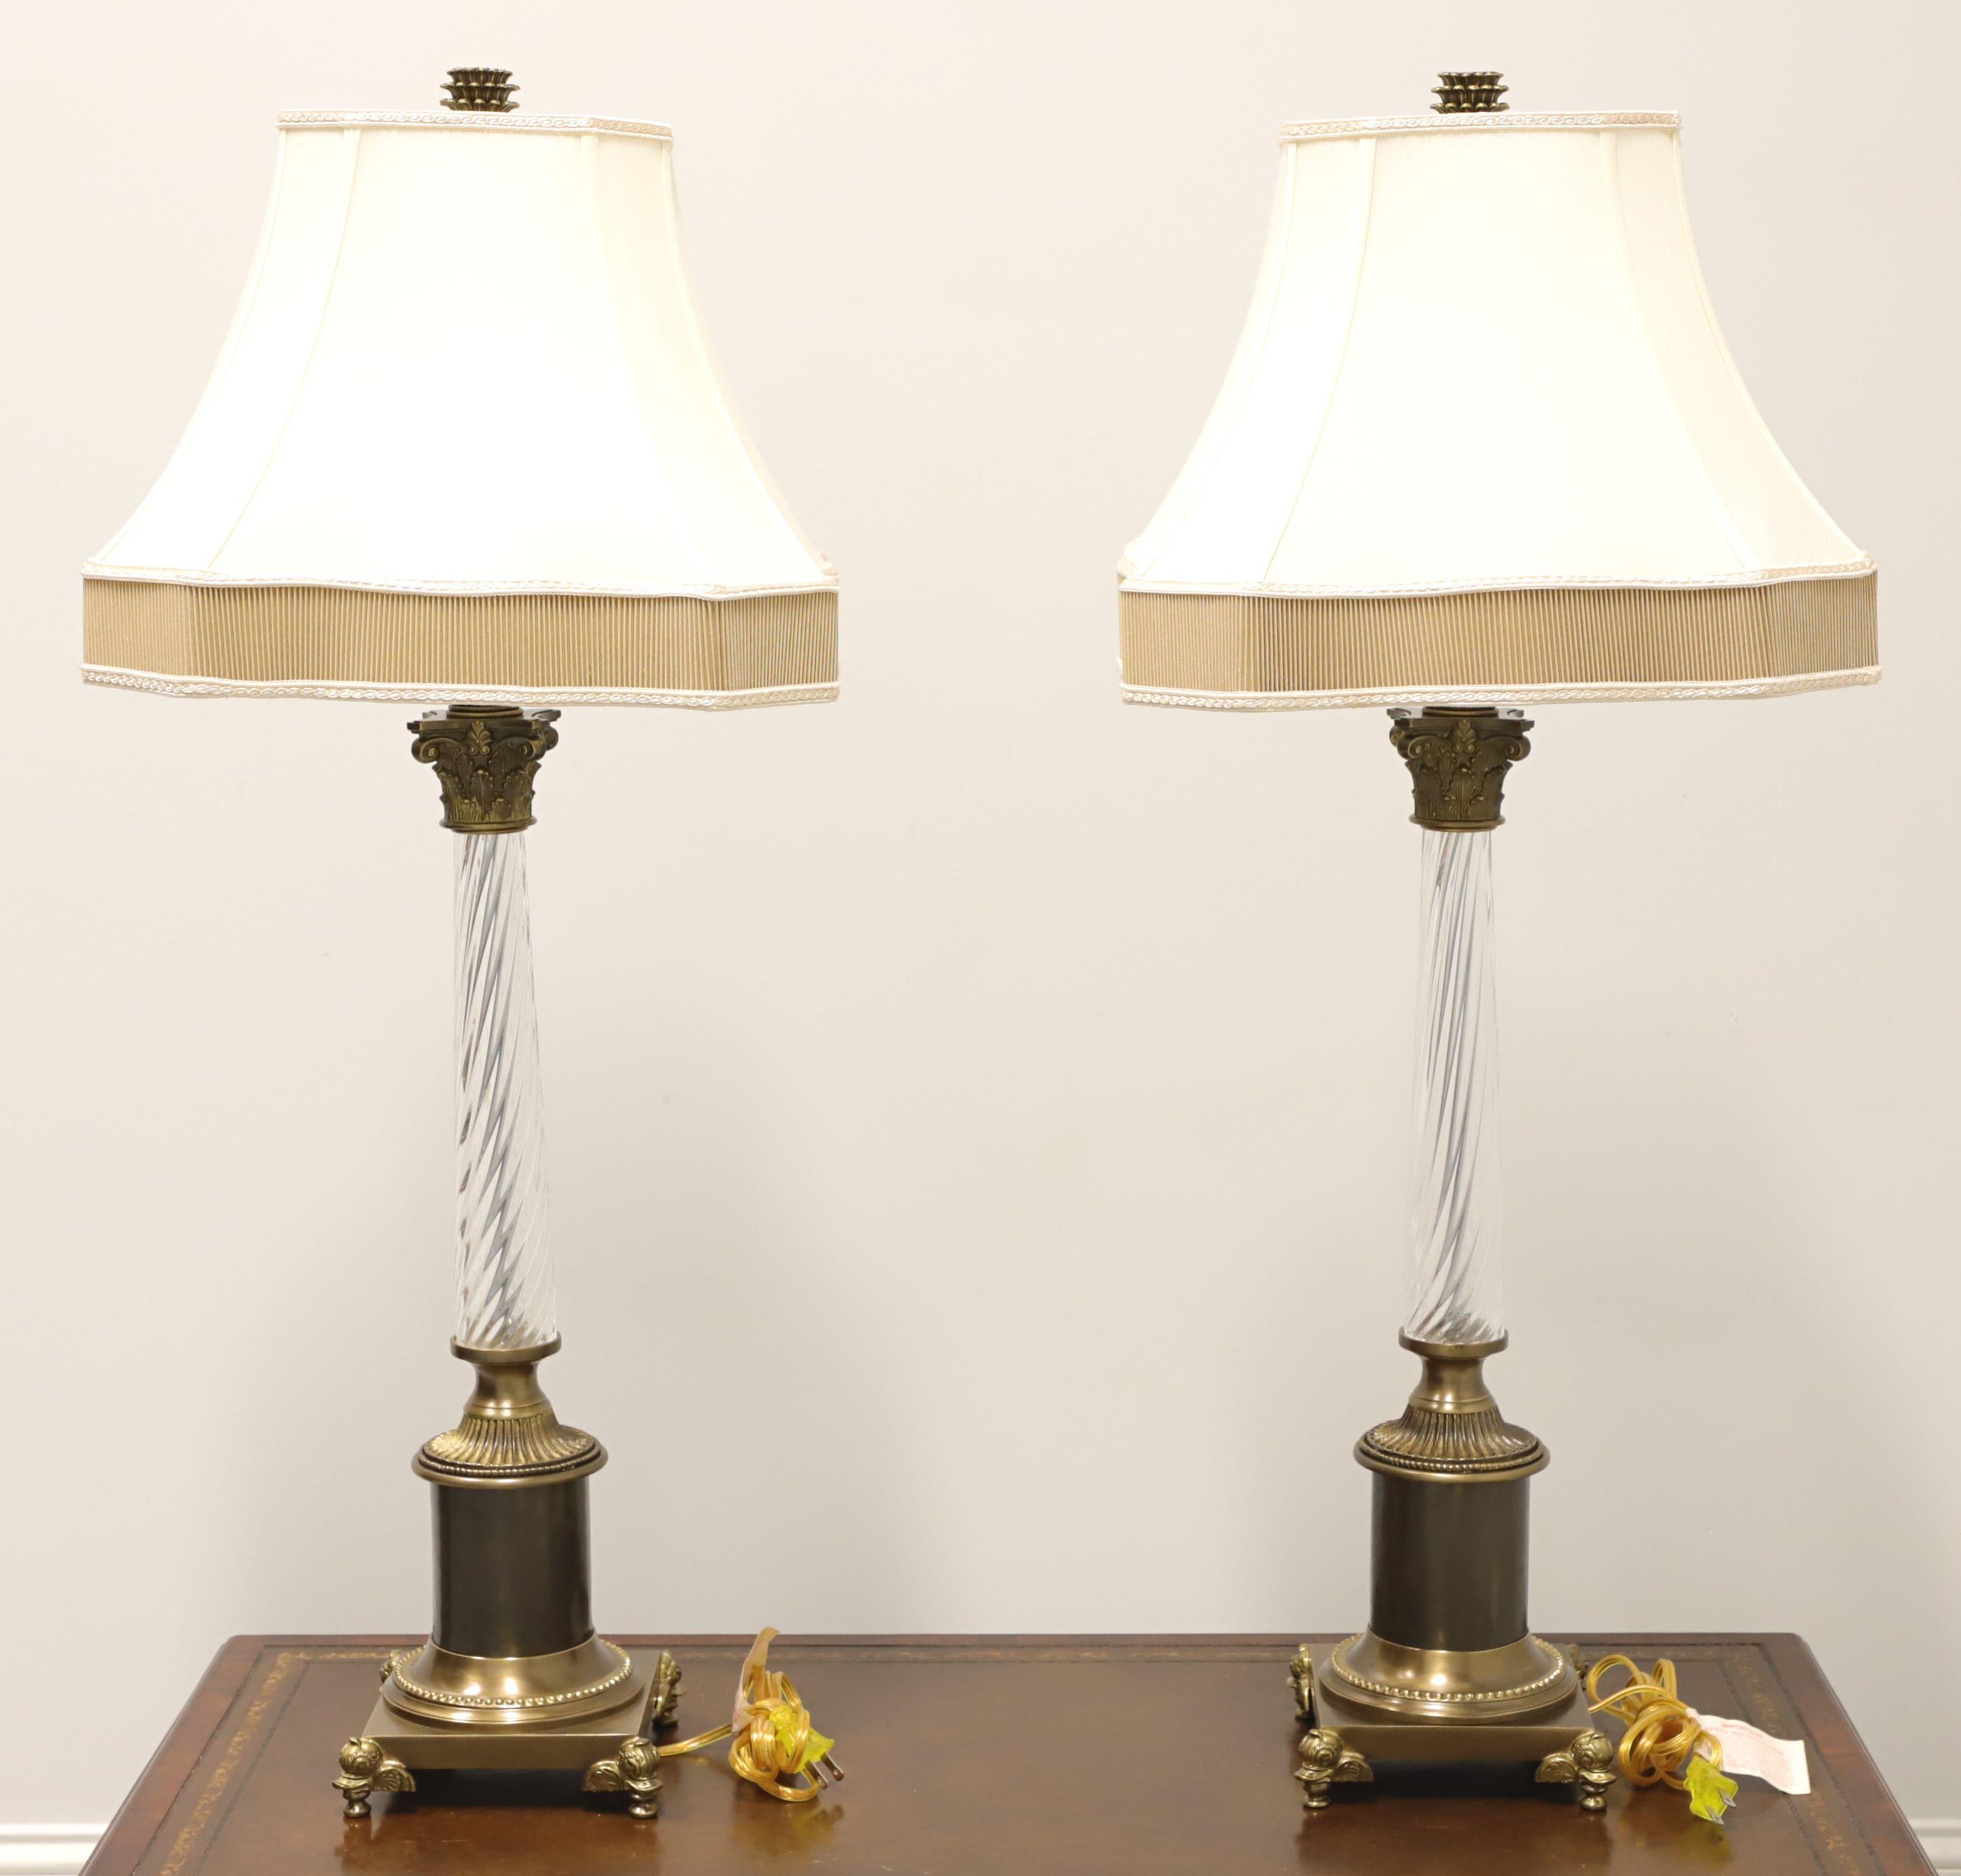 American CHELSEA HOUSE Brass & Glass Traditional Table Lamps with Duckhead Feet - Pair For Sale